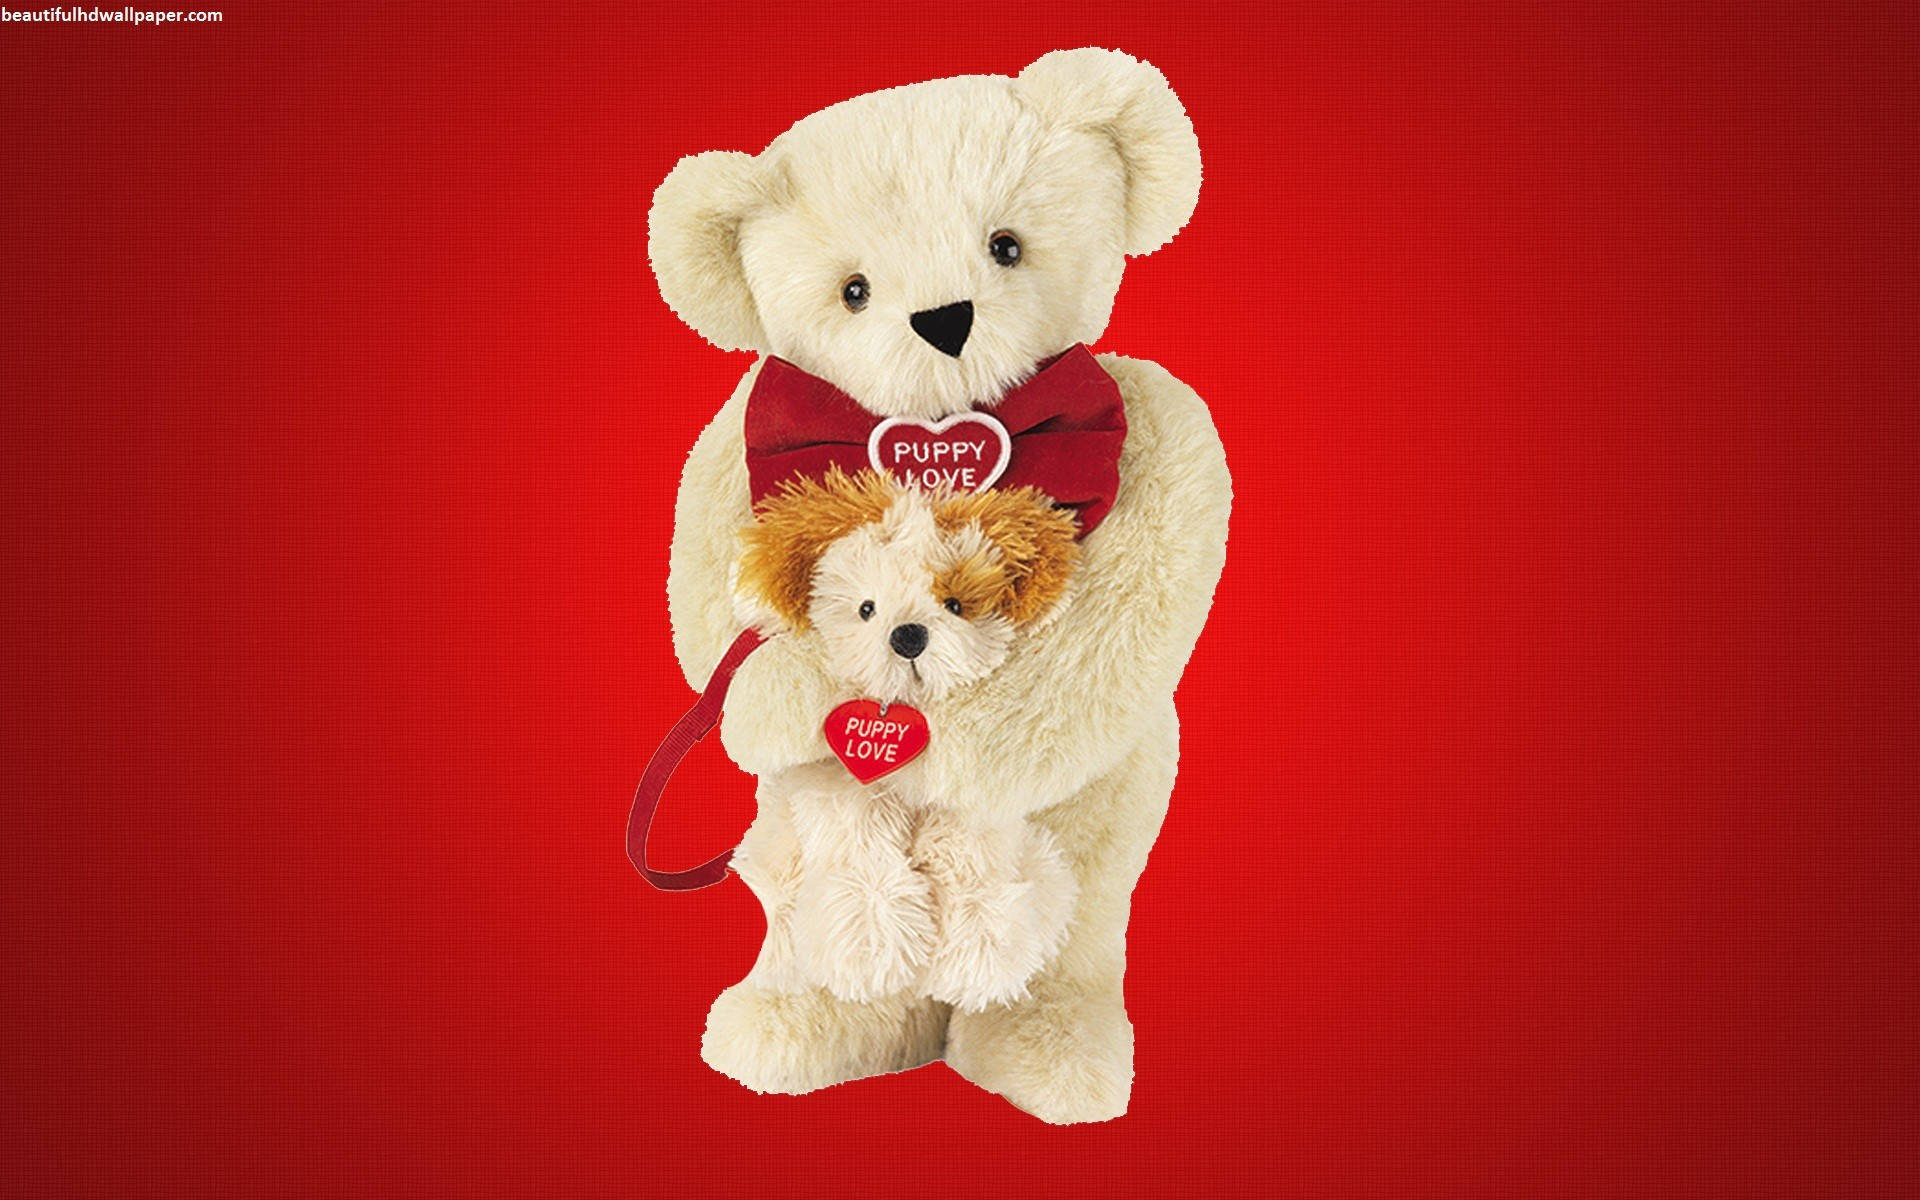 Enjoy The Love Of February With These Cute Teddy Bears Wallpaper